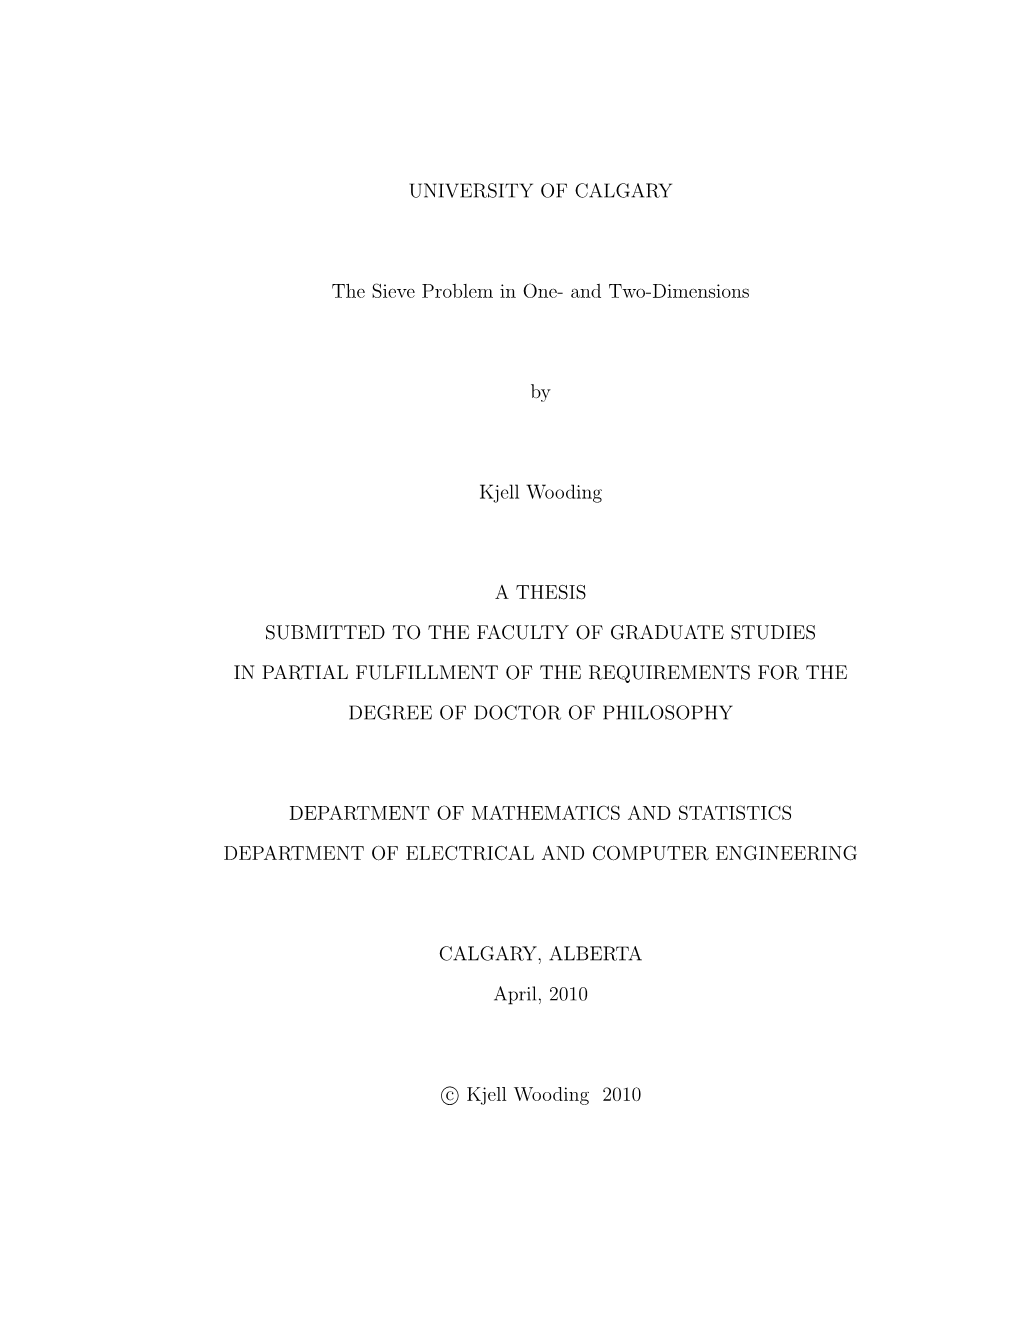 UNIVERSITY of CALGARY the Sieve Problem in One- and Two-Dimensions by Kjell Wooding a THESIS SUBMITTED to the FACULTY of GRADUAT